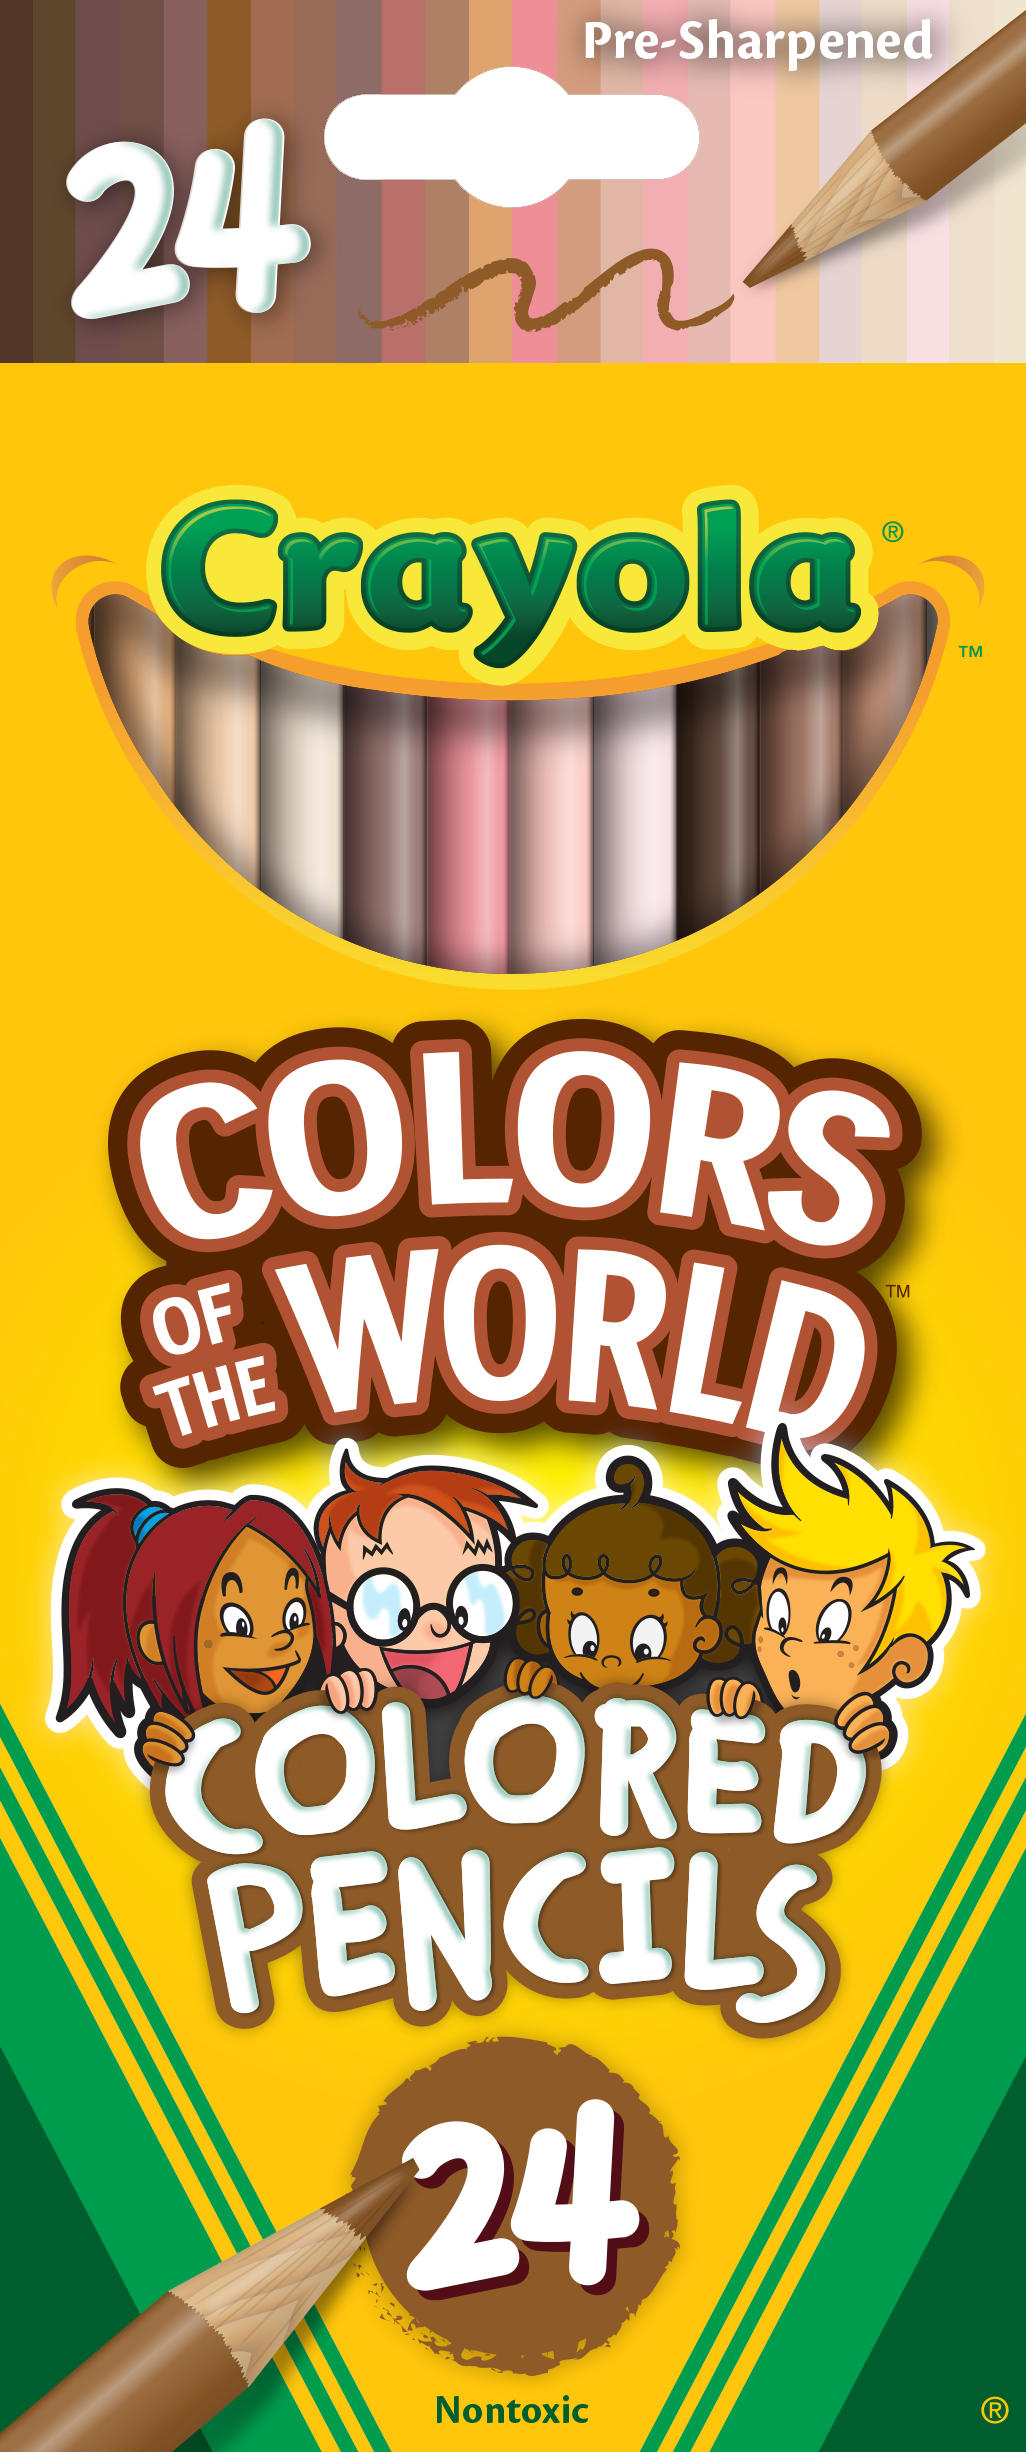 Crayola Colors of the World Colored Pencils - 24 colors